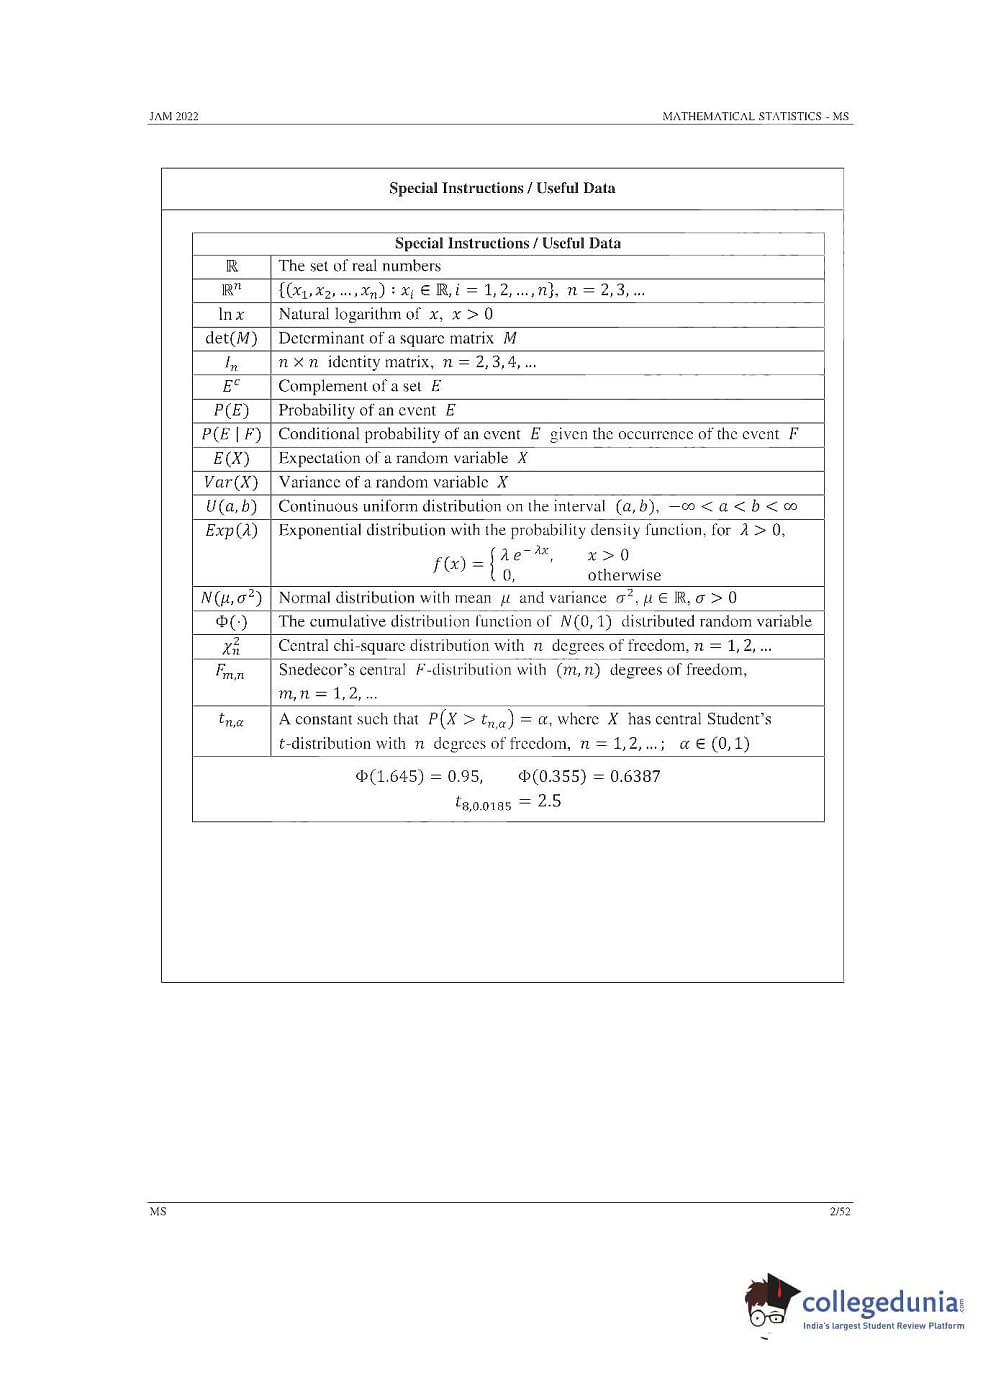 IIT JAM 2022 Mathematical Statistics (MS) Question Paper with ...